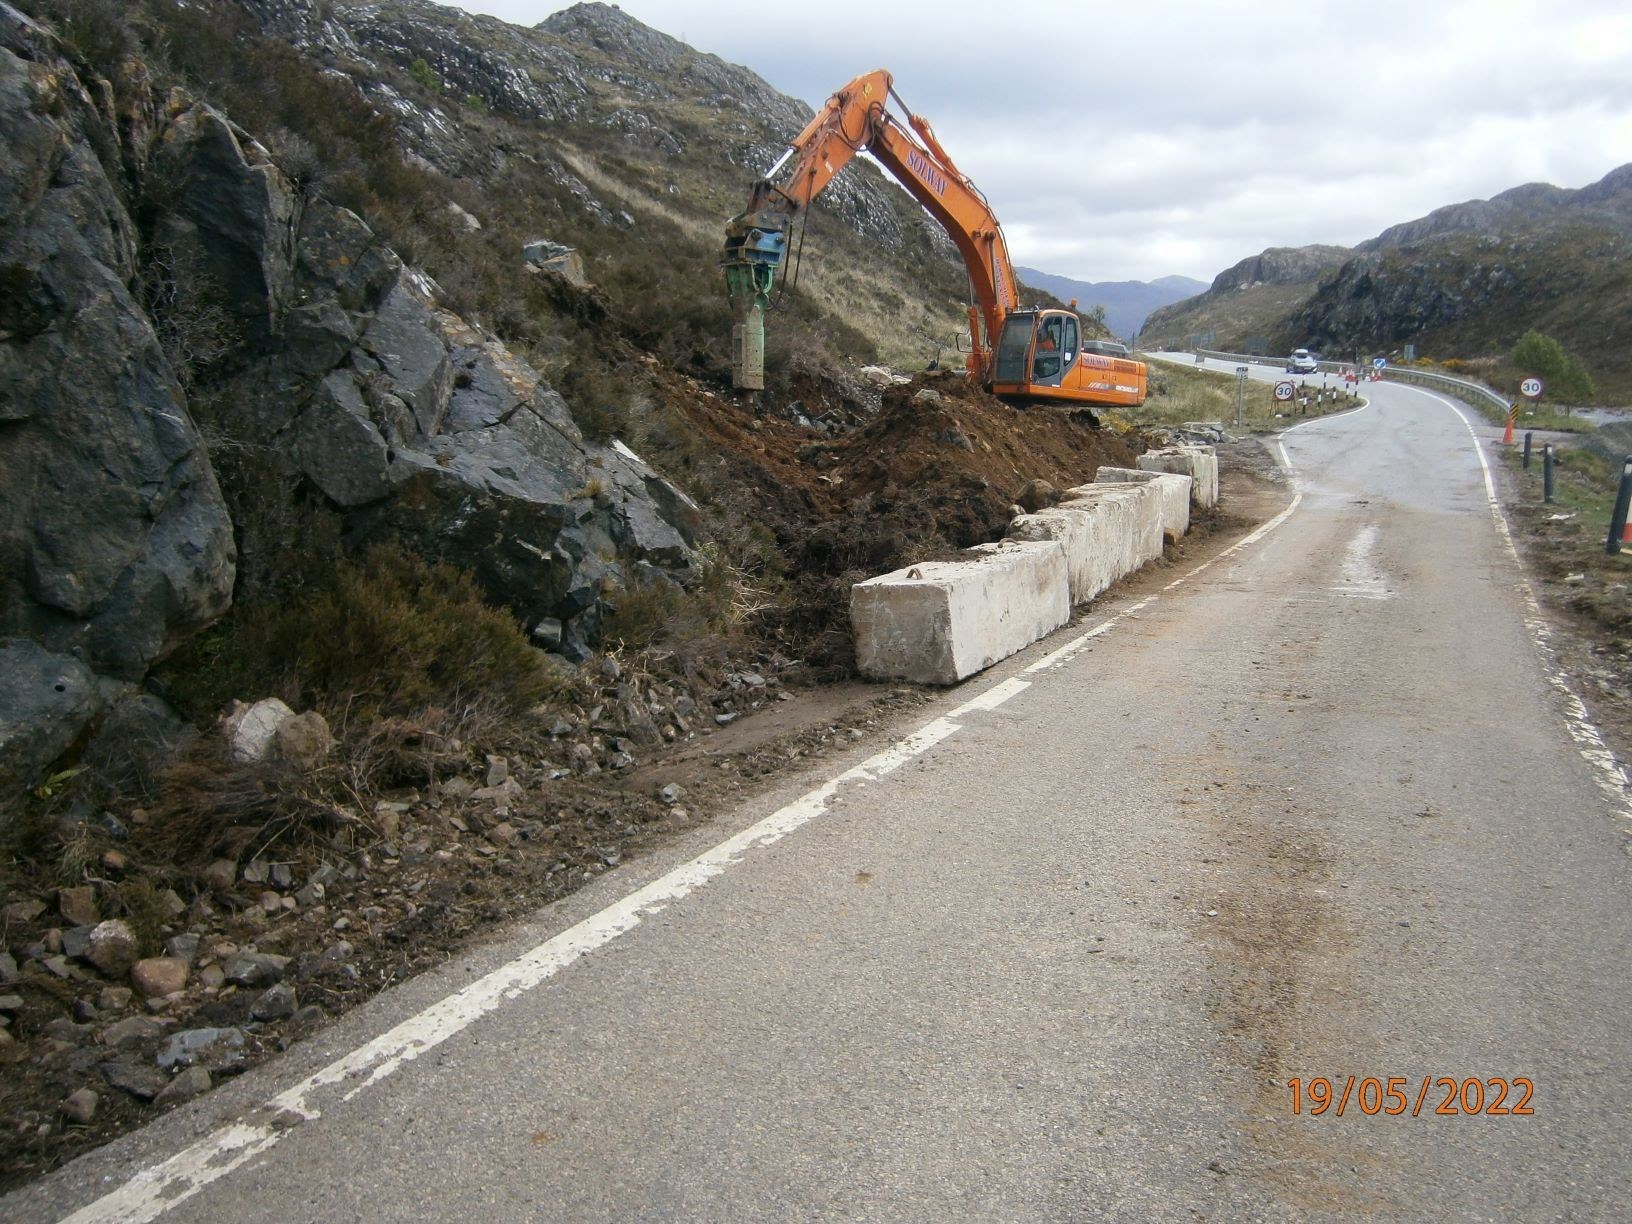 The area of the A832 being worked on and where the blasting will be taking place.